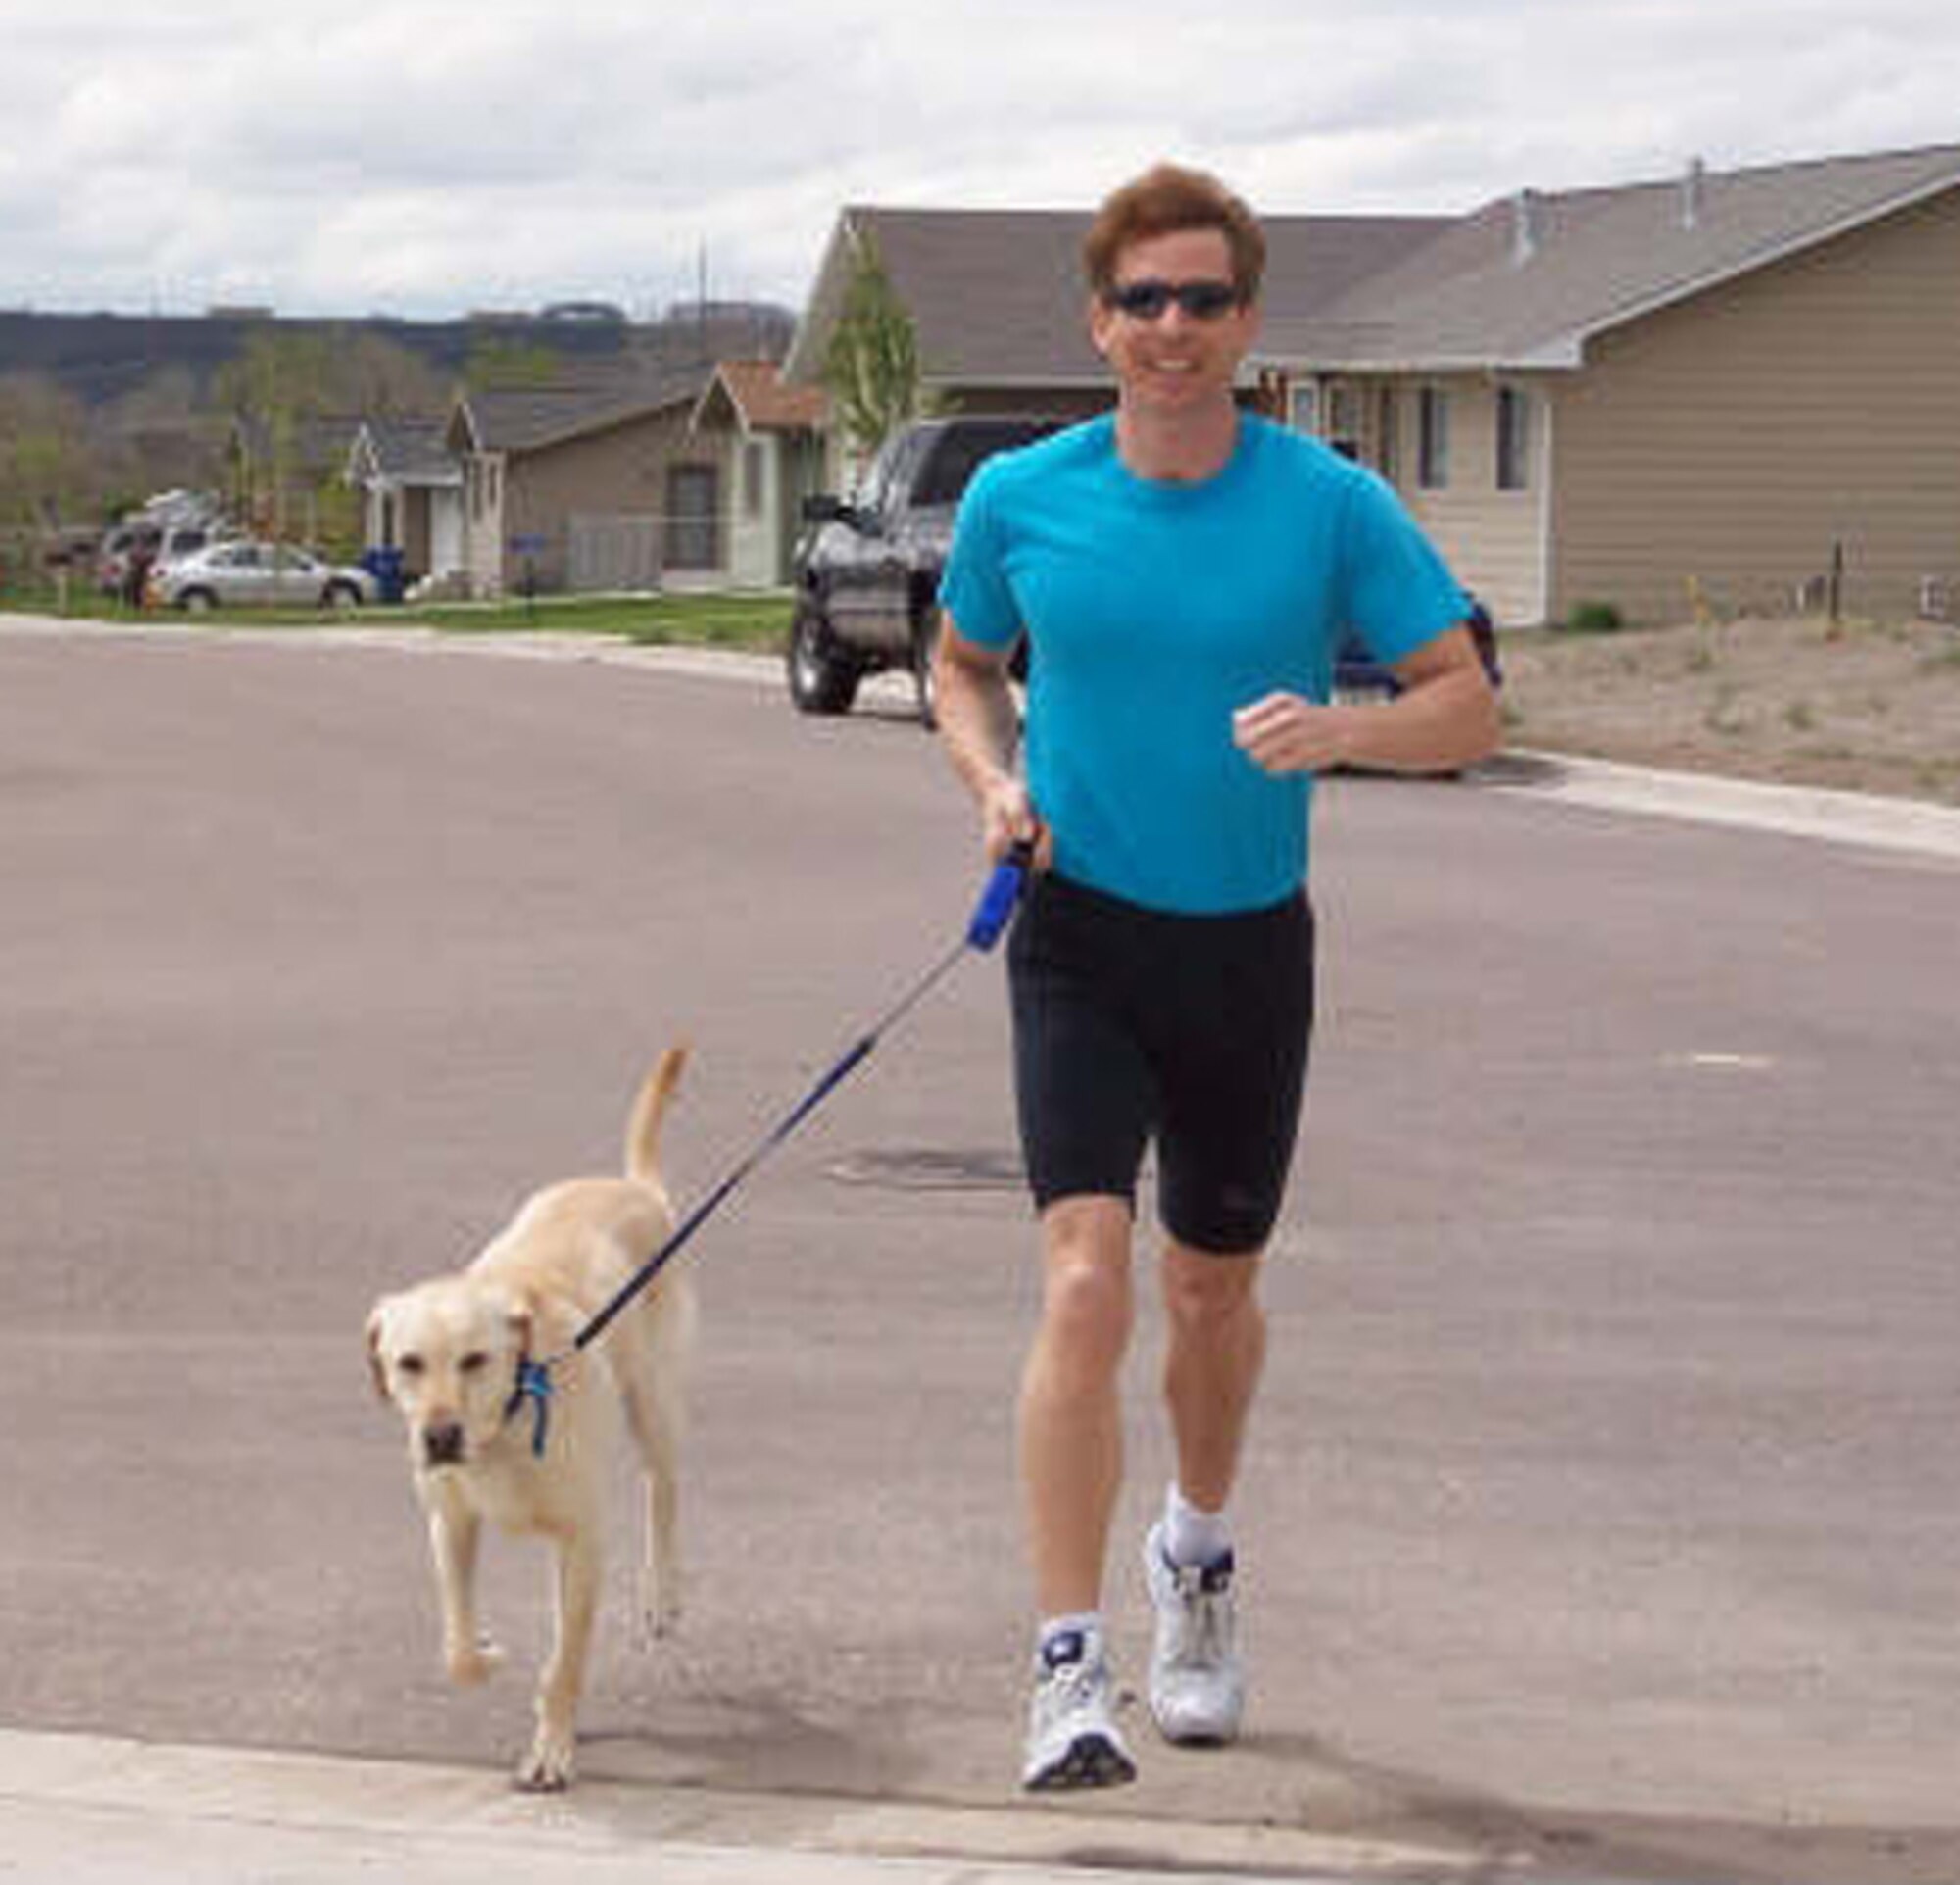 Eric Thayer returns to his home with his running mate, Jasper, following a weekend jaunt that is part of his regular exercise routine. (Courtesy photo)